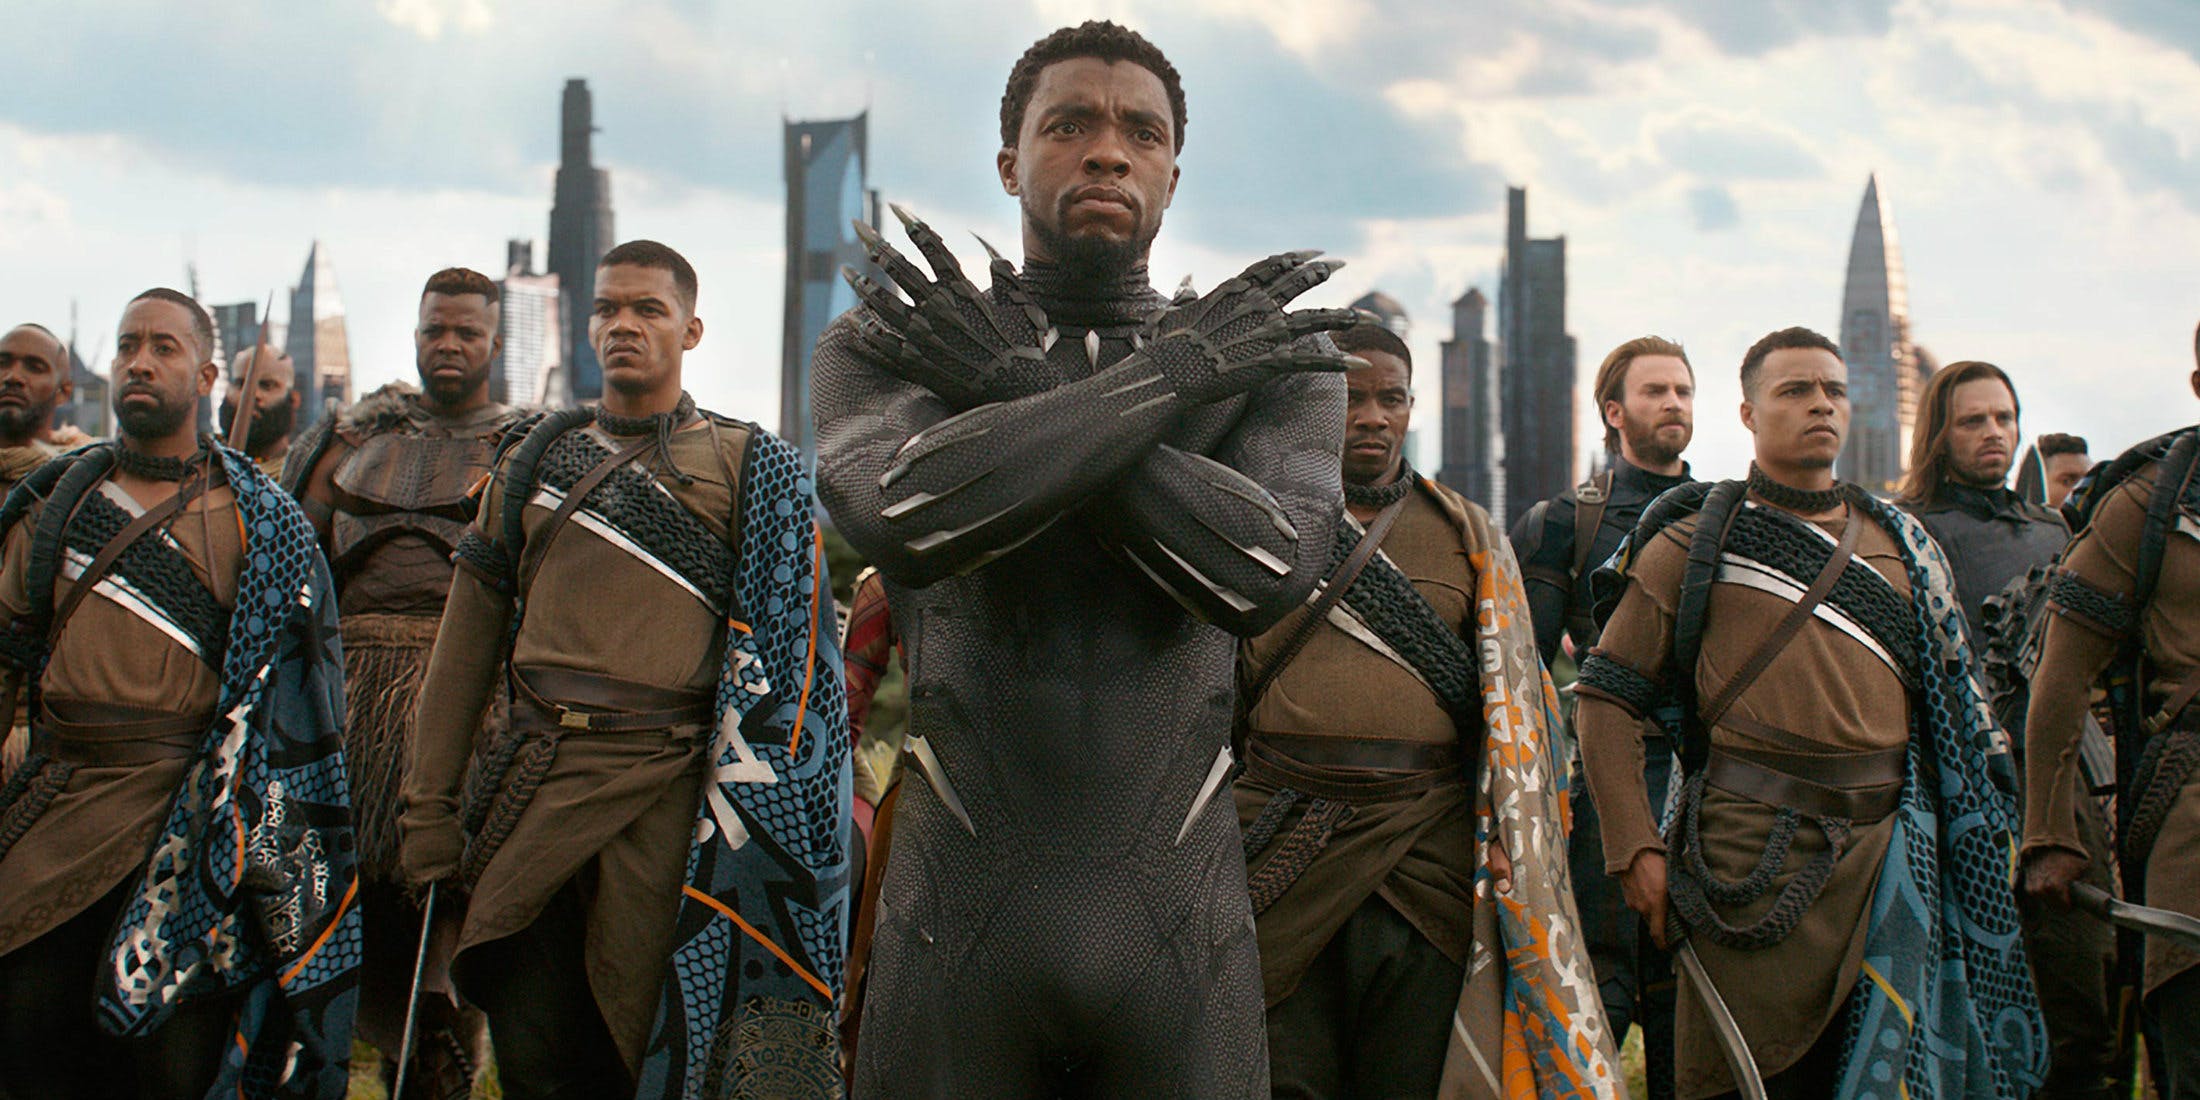 Chadwick Boseman, who played King T’challa of Wakanda, Africa chanted the kingdom’s motto ‘Wakanda forever!’ in the Black Panther movie.